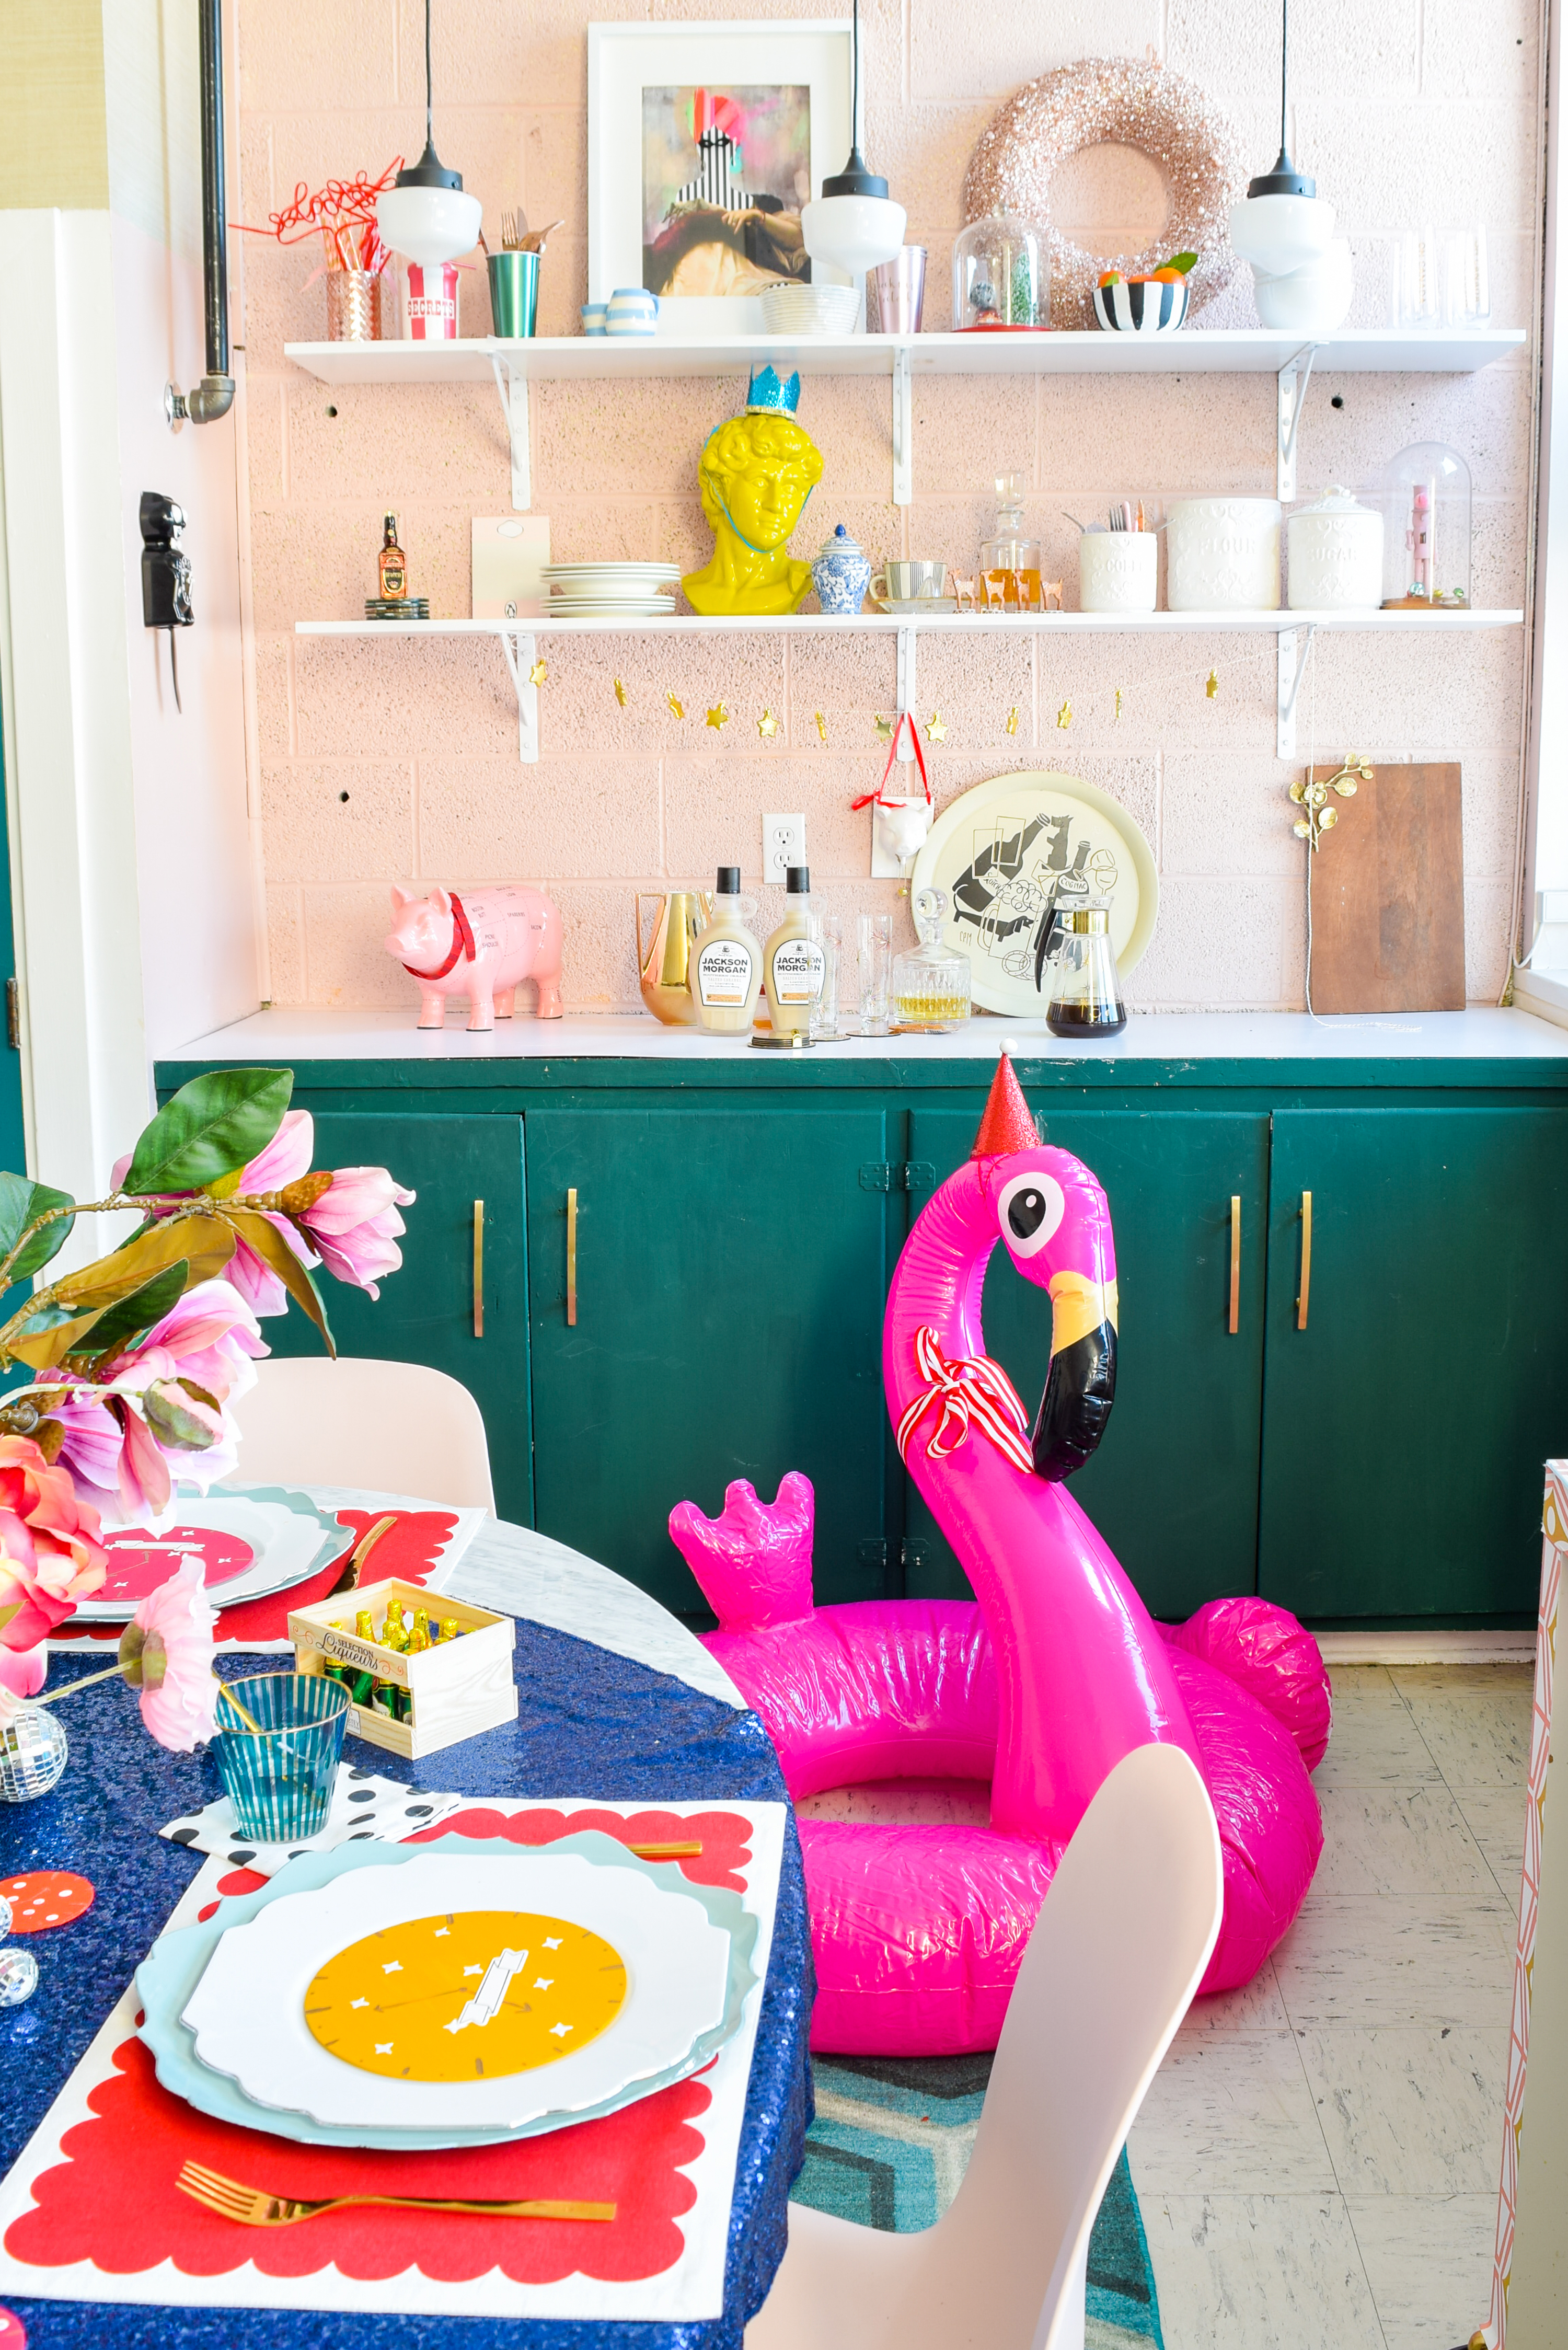  For my Kate Spade New Years Eve Tablescape you bet I went glitzy and colourful, and invited an inflatable flamingo in a Santa hat. Come see what else is shaking!